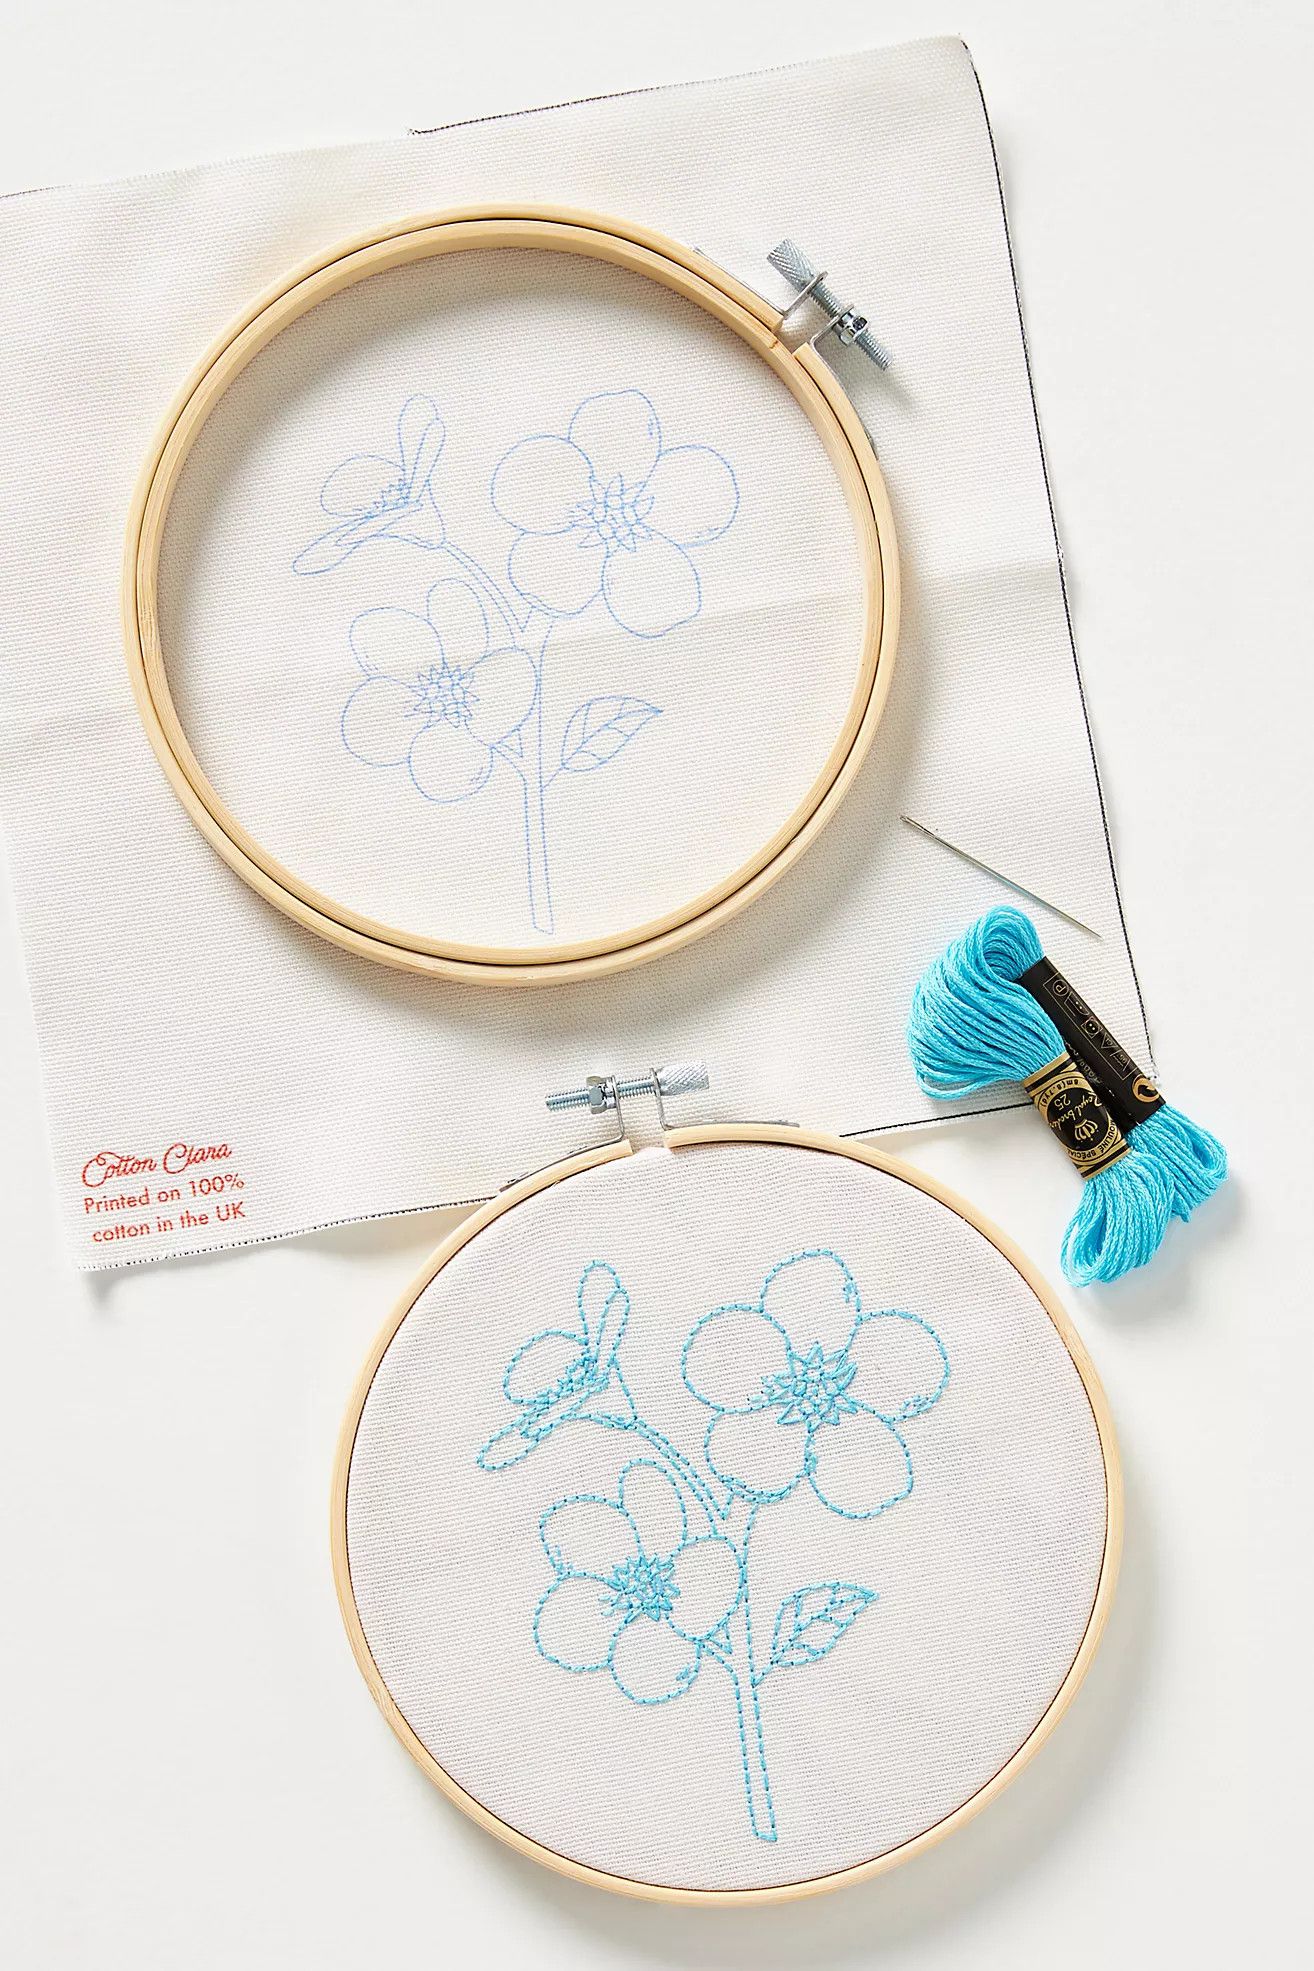 Forget Me Knot Embroidery Kit | Anthropologie (US)